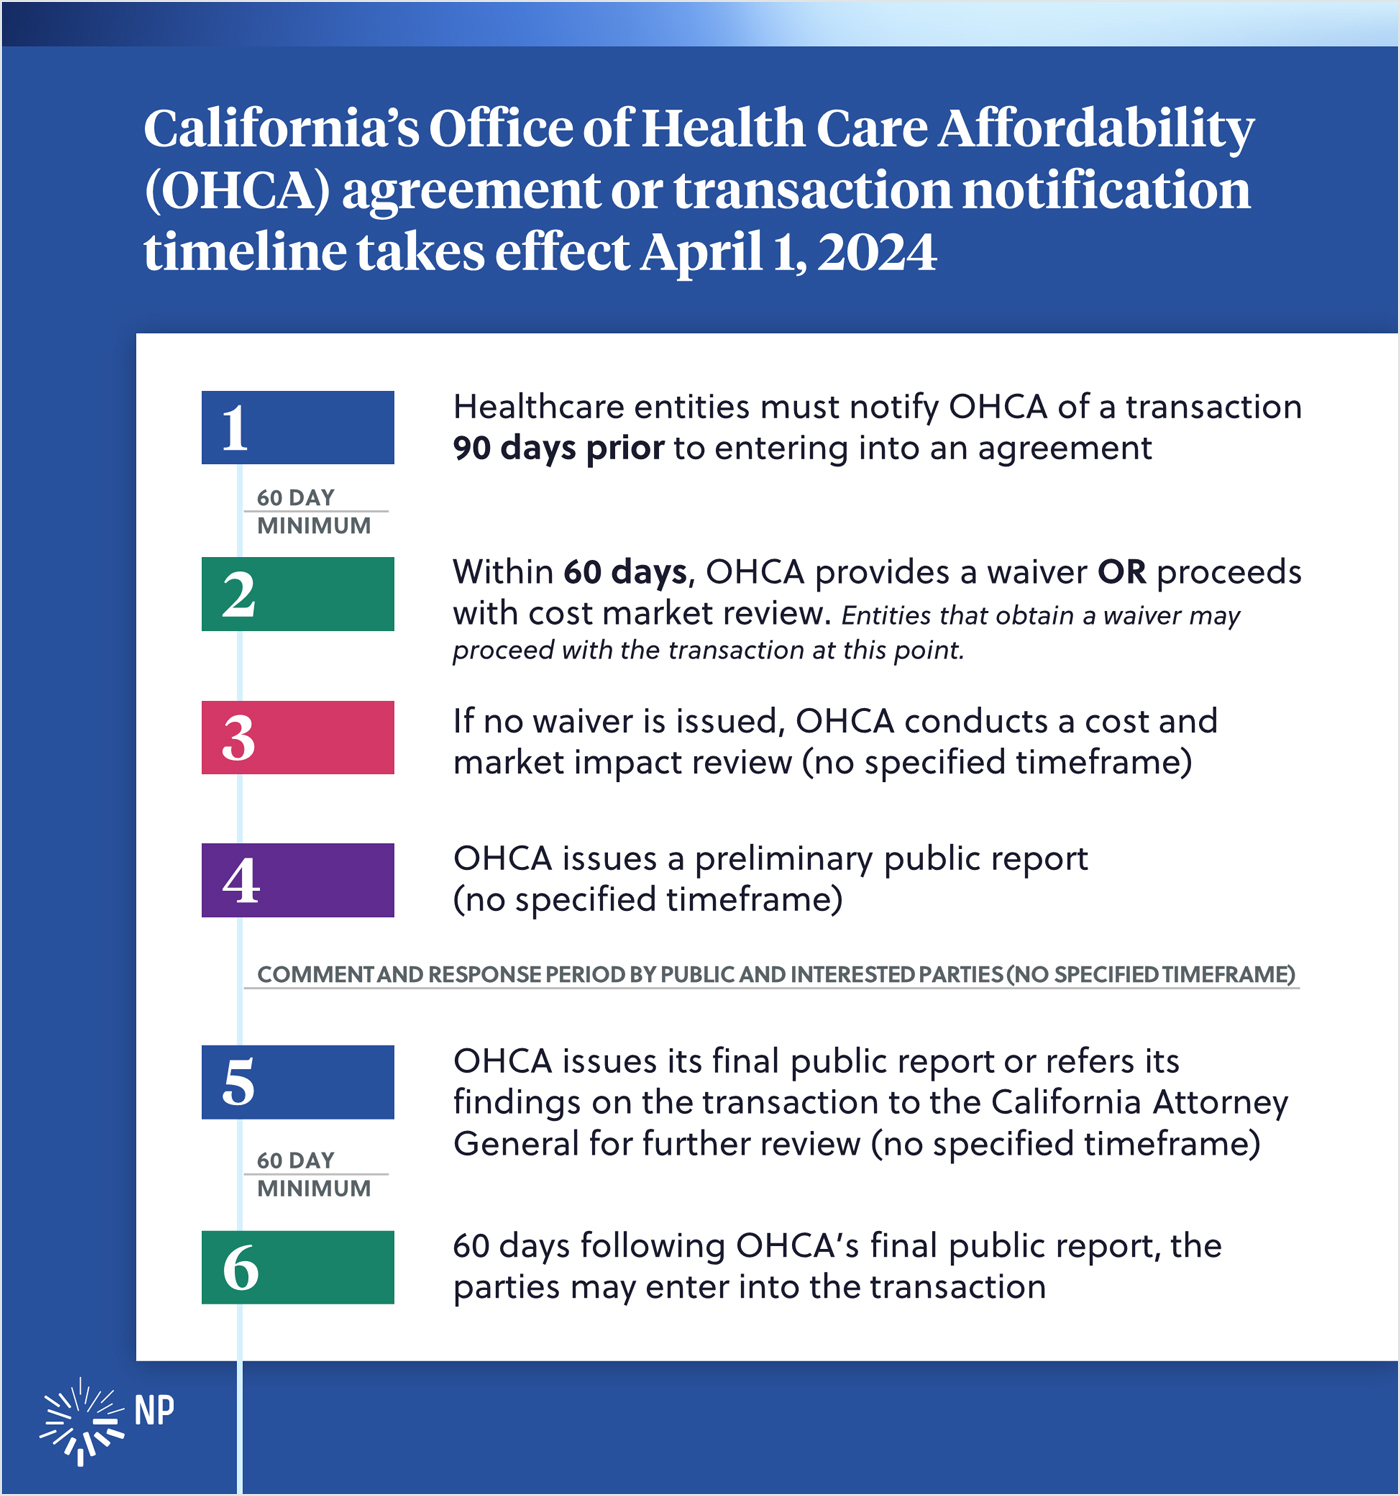 California's Office of Health Care Affordability (OHCA) agreement or transaction notification timeline takes effect April 1, 2024